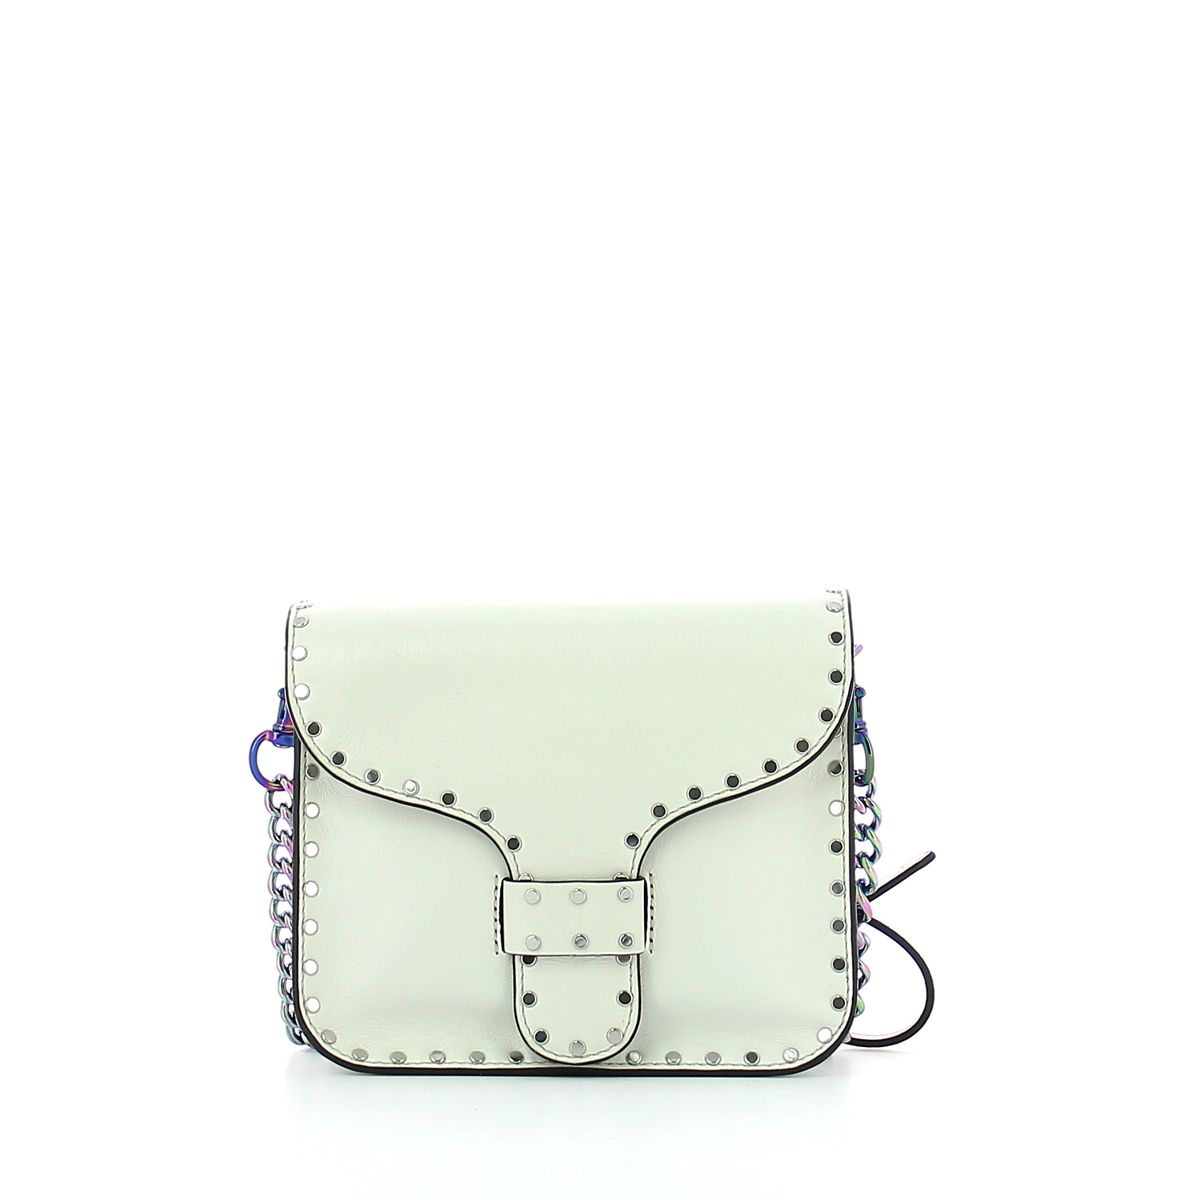 Midnighter Mini Messenger shows how much Rebecca Minkoff know its girls: a simple, understated crossbody, with an edge. We love everything about it: the smooth, genuine leather, the metal studs, the essential silhouette.